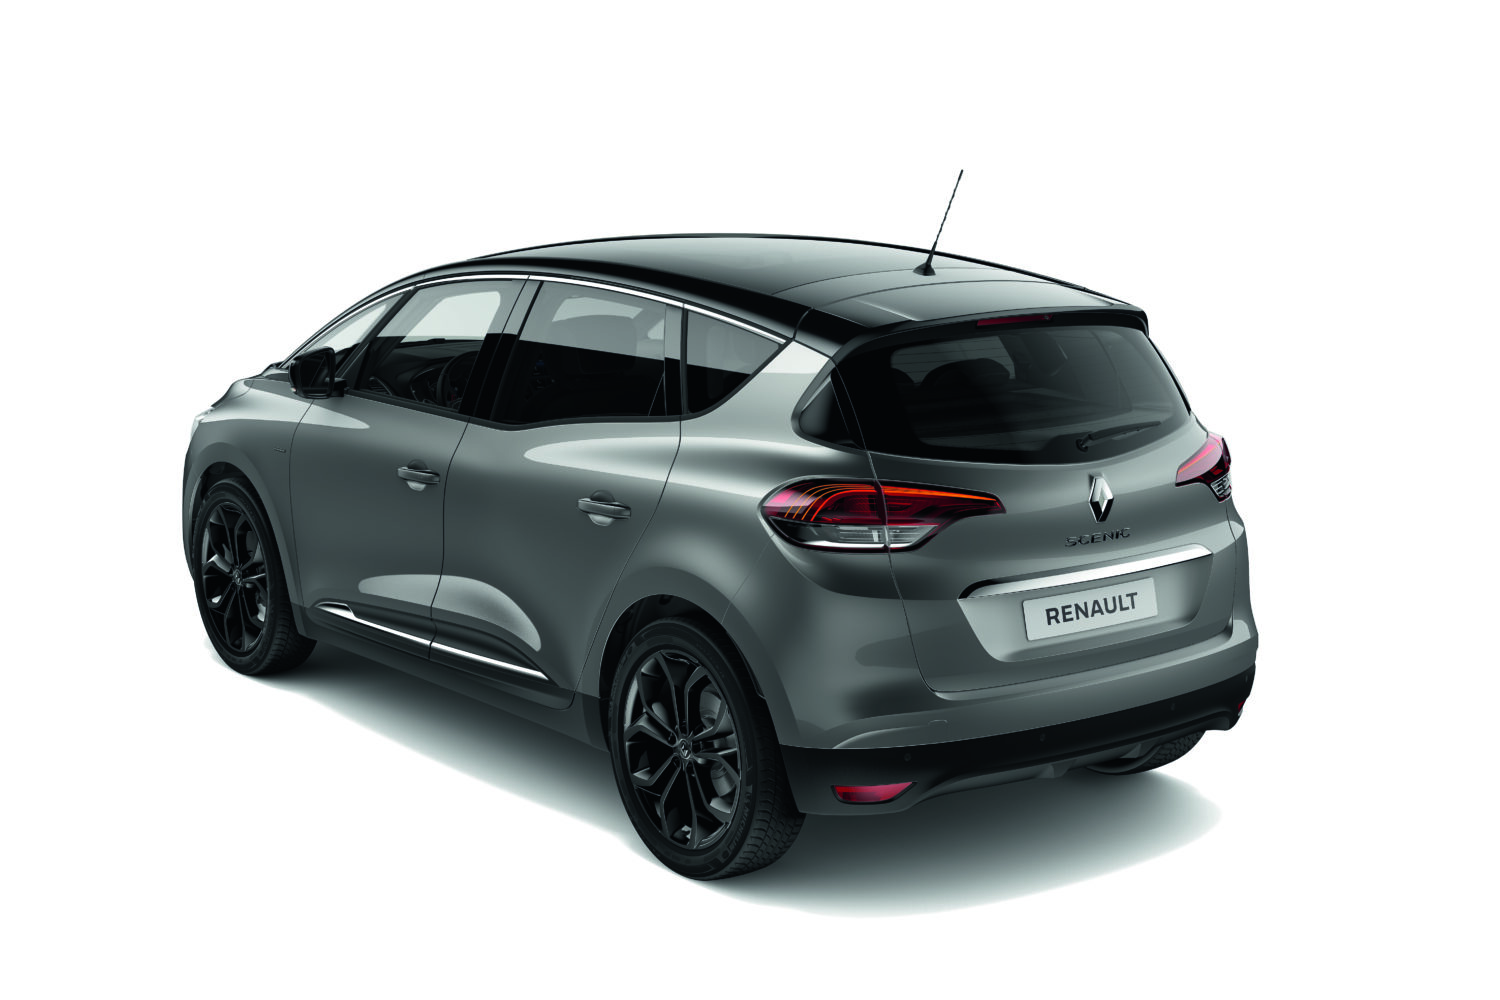 2019 - Renault SCENIC Black Edition Limited Edition